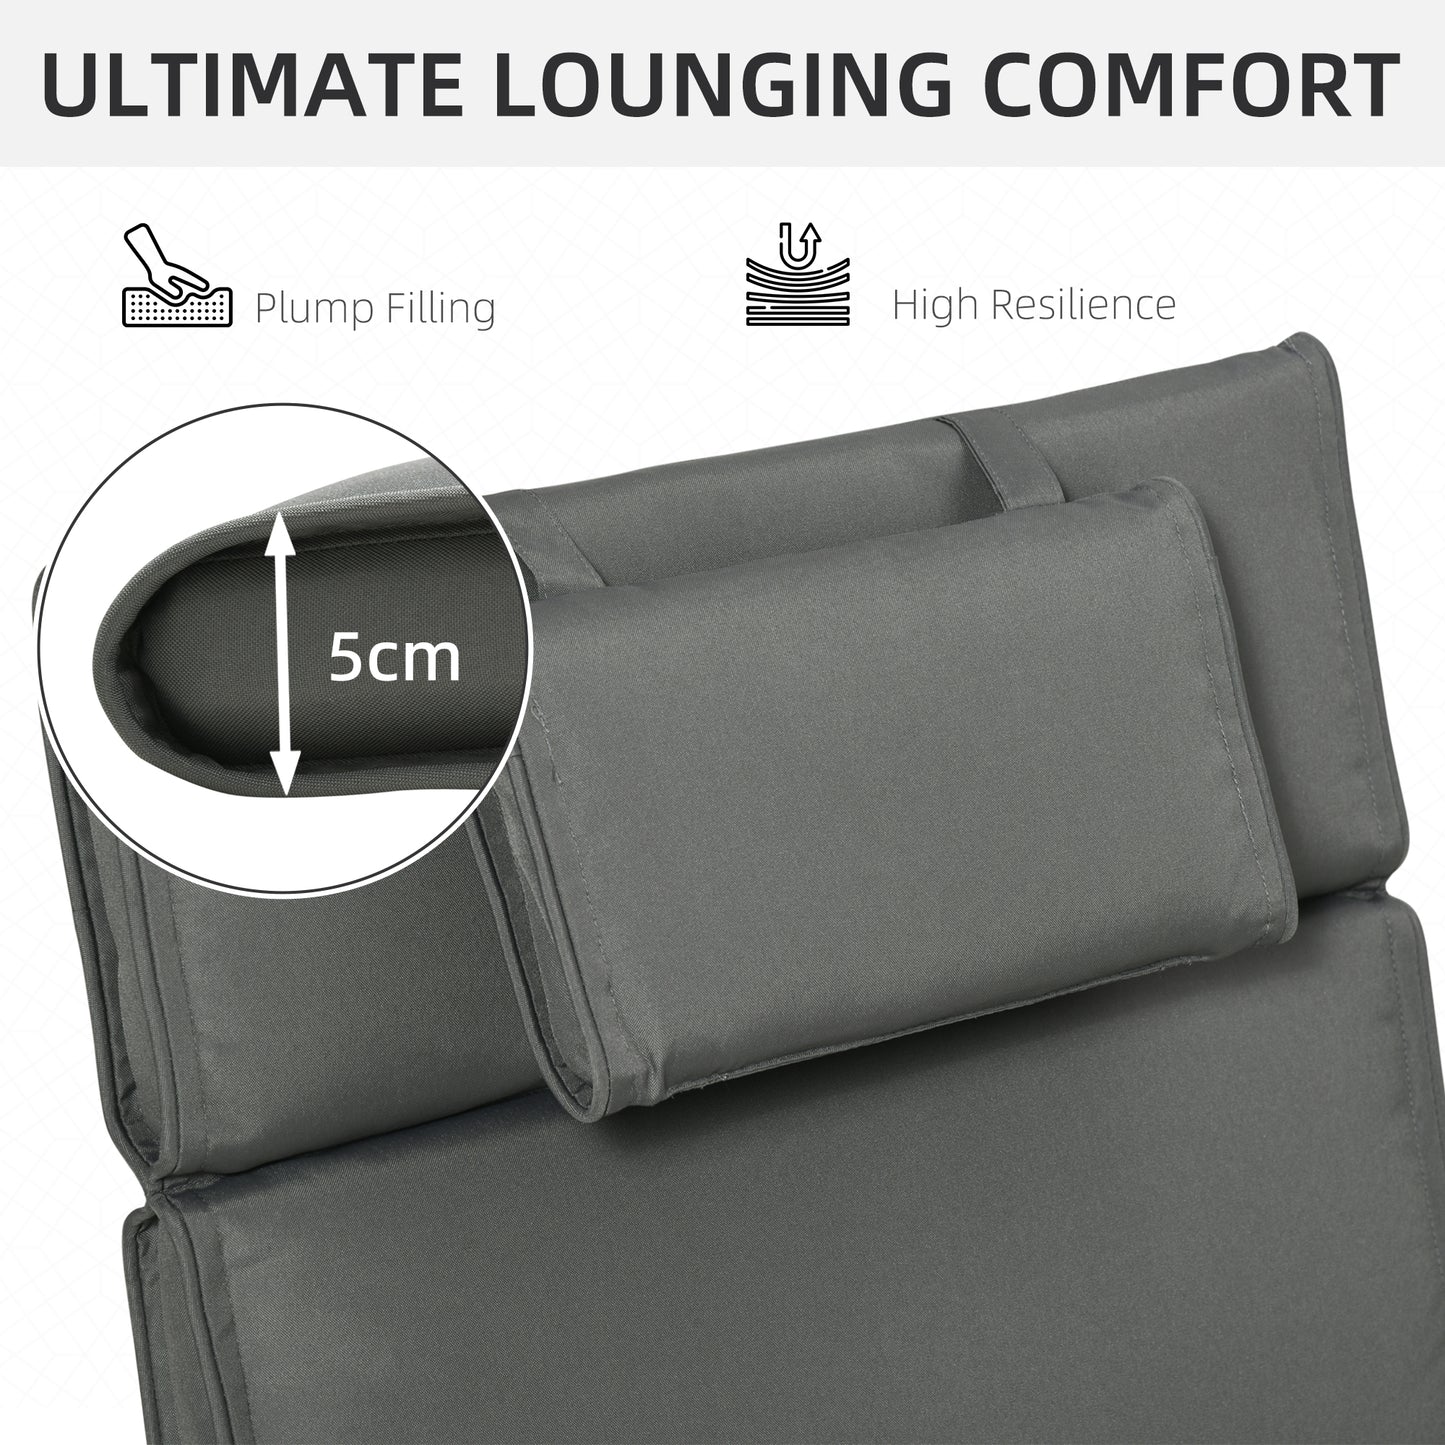 Outsunny Garden Sun Lounger Cushion Replacement Thick Sunbed Reclining Chair Relaxer Pad with Pillow - Grey